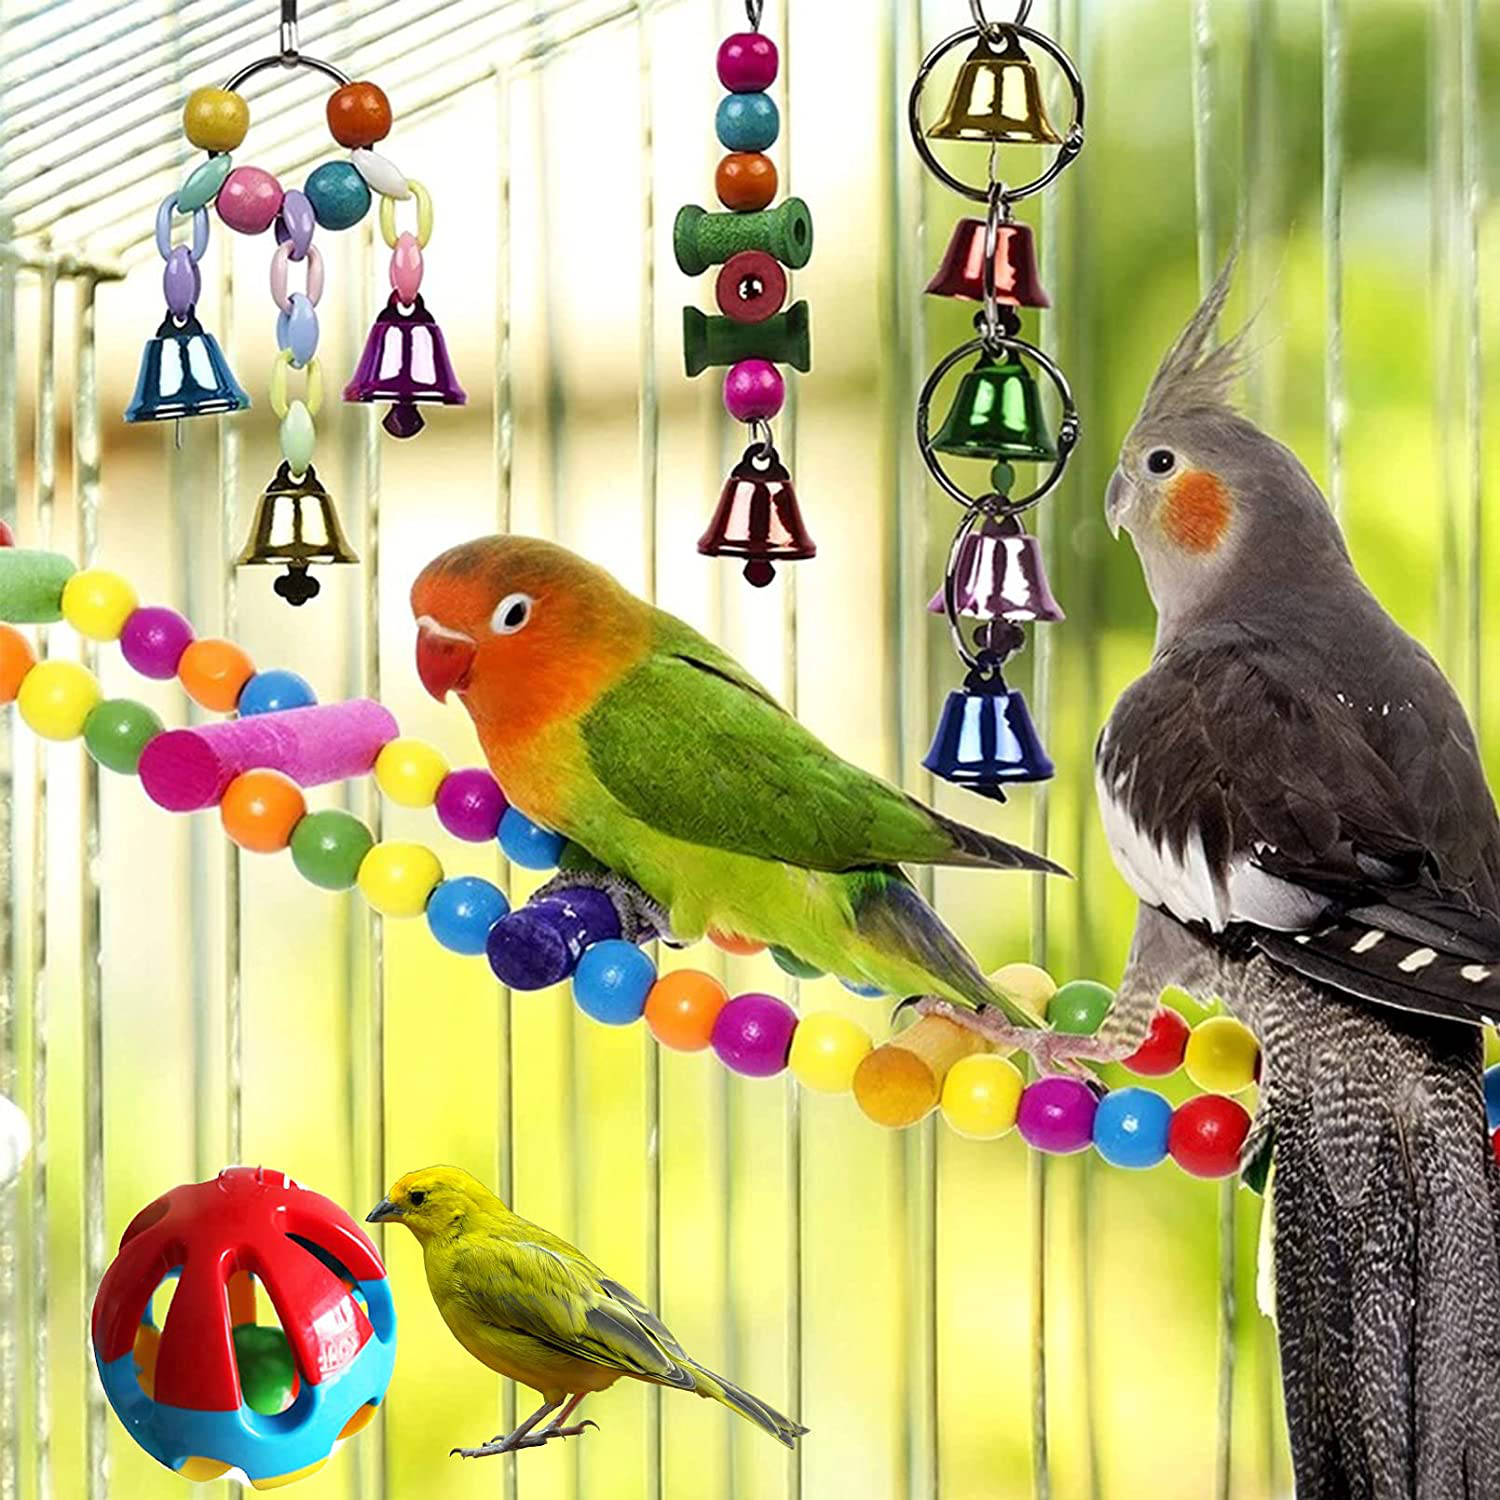 Hamiledyi Bird Parrot Swing Chewing Toy Set 15PCS Wooden Hanging Bell with Hammock Climbing Ladders Colorful Pet Birds Cage Toys for Small Parakeet Cockatiel Conures Finches Budgie Macaws Love Birds Animals & Pet Supplies > Pet Supplies > Bird Supplies > Bird Cage Accessories Hamiledyi   